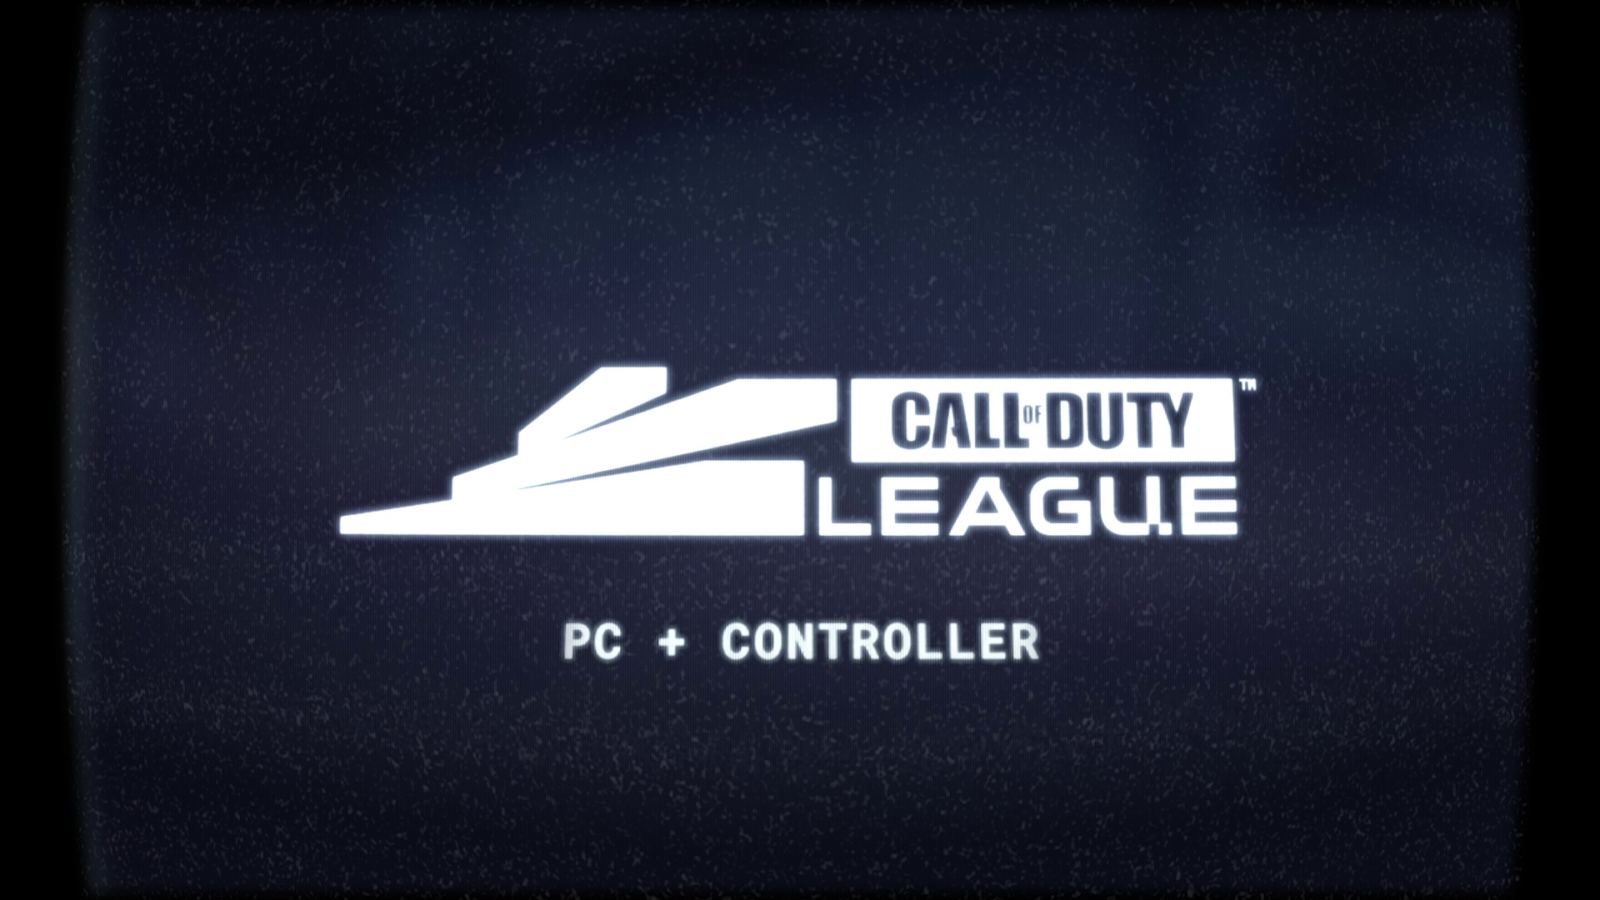 Call of Duty League Parts Ways With PlayStation, to be Played On PC with Xbox Controller Support